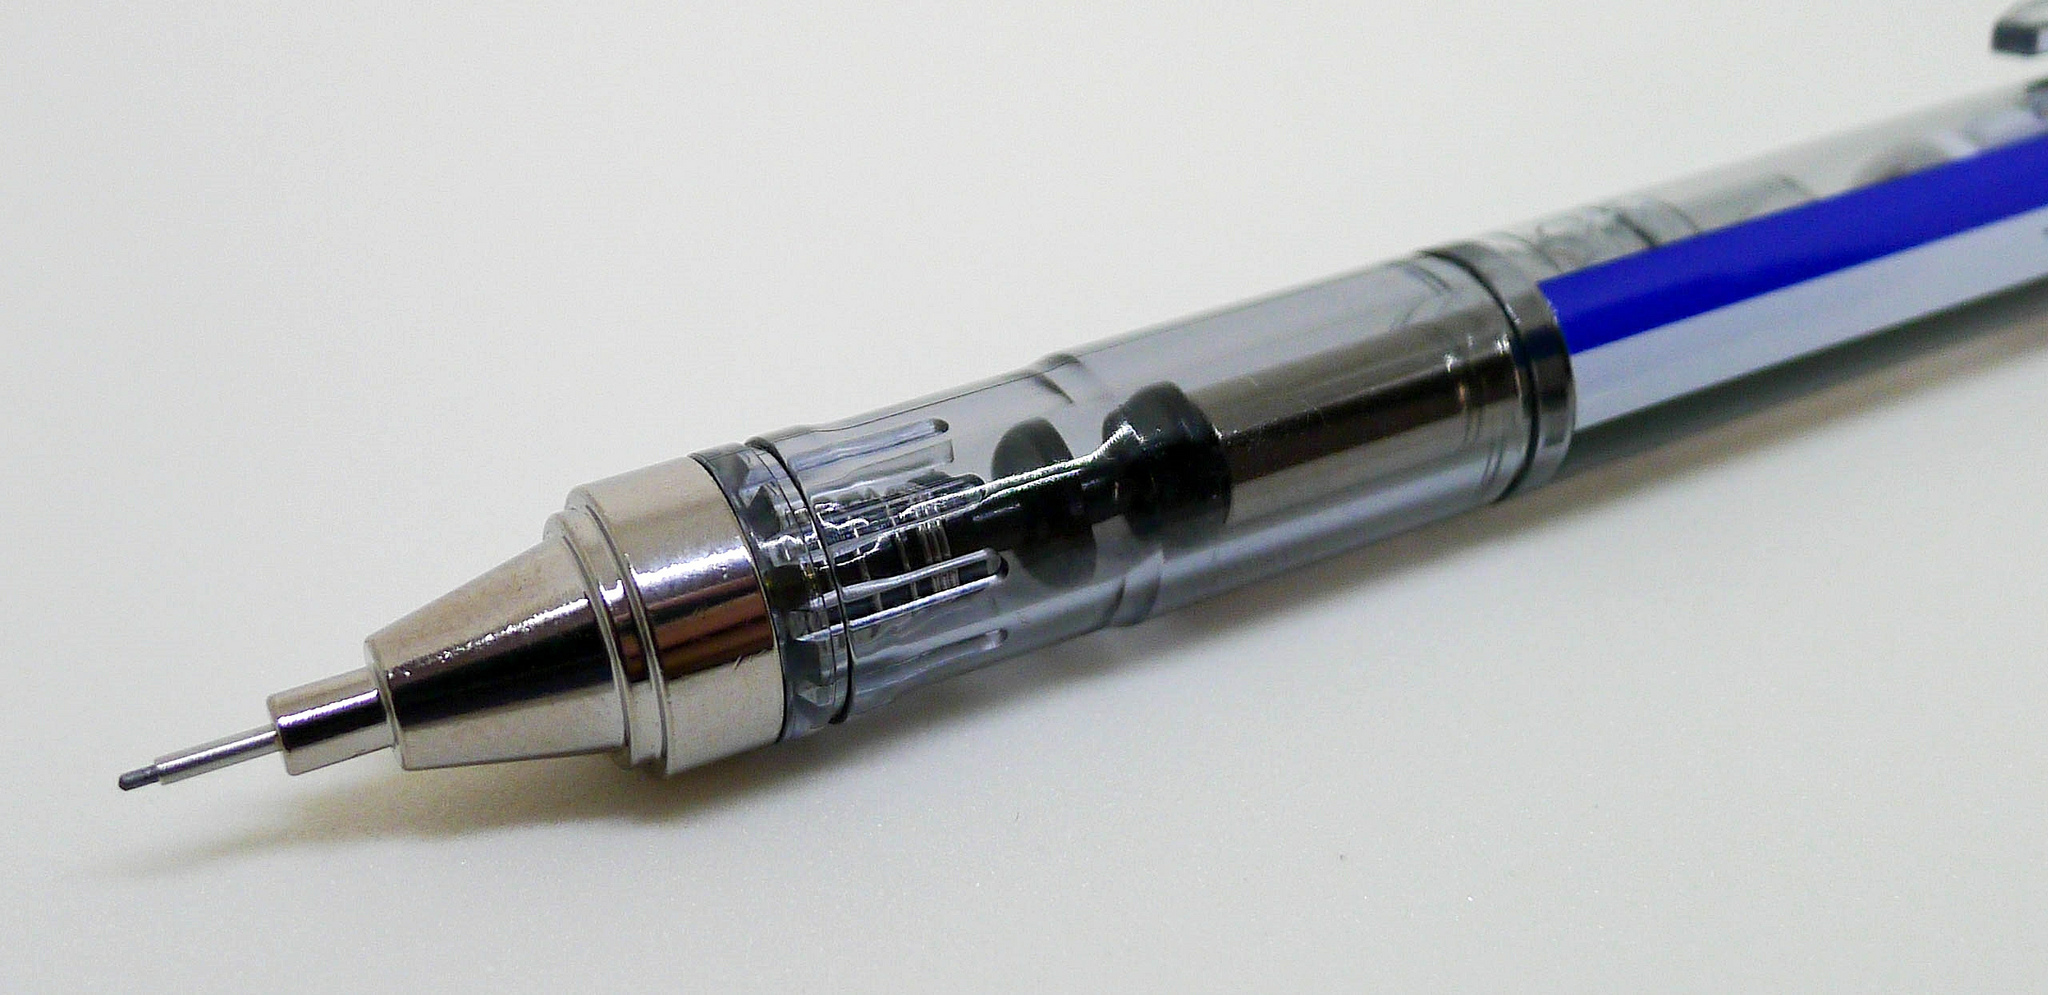  rOtring Rapidograph 0.4mm Technical Pen : Everything Else